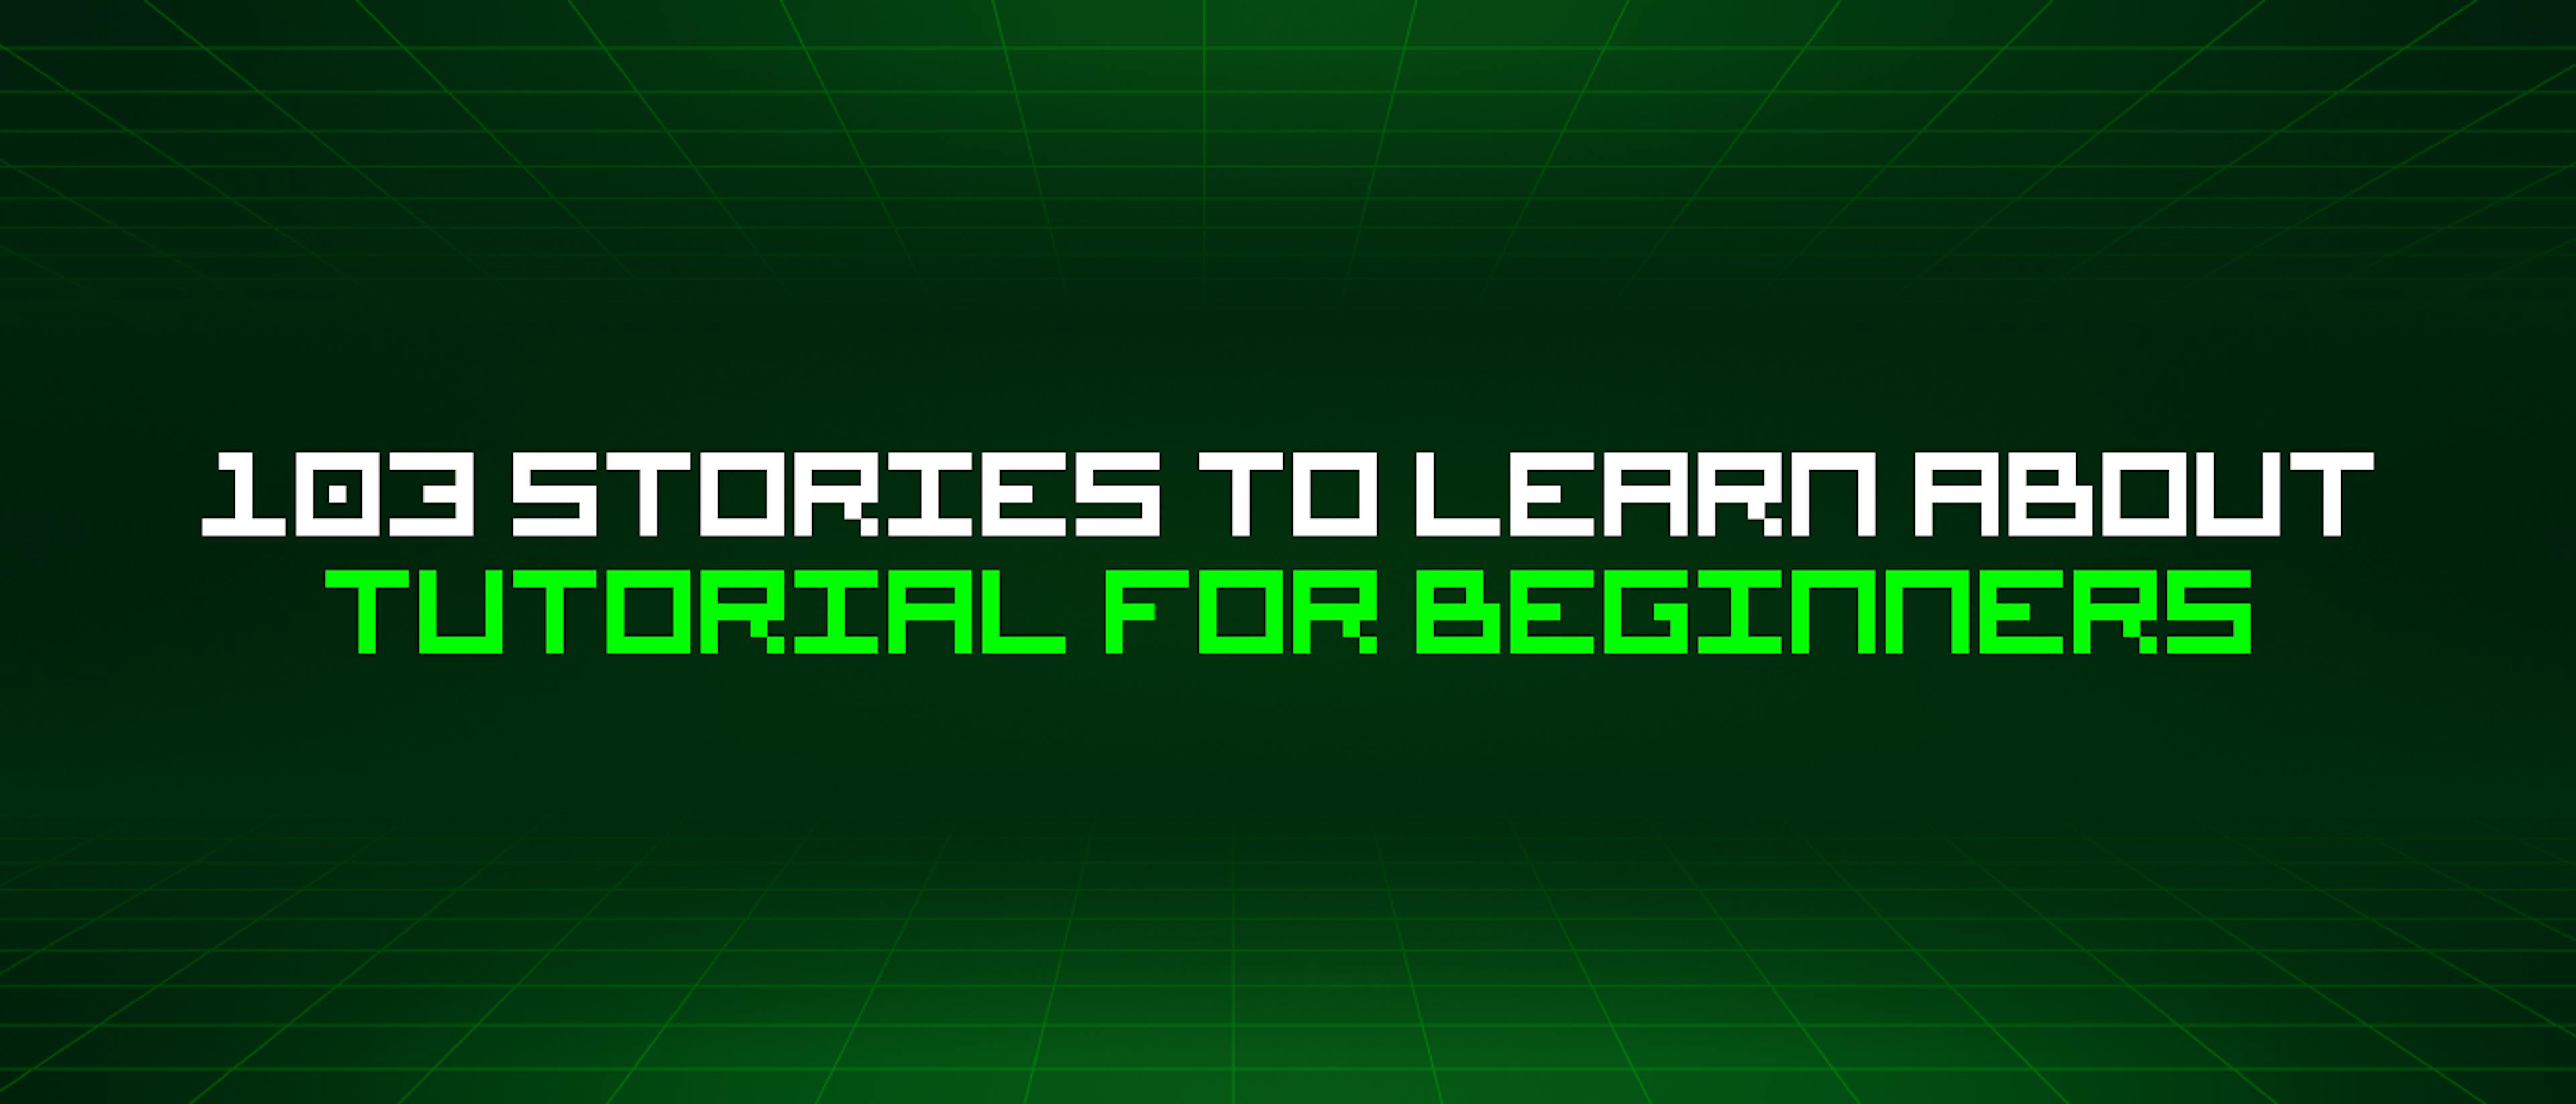 featured image - 103 Stories To Learn About Tutorial For Beginners